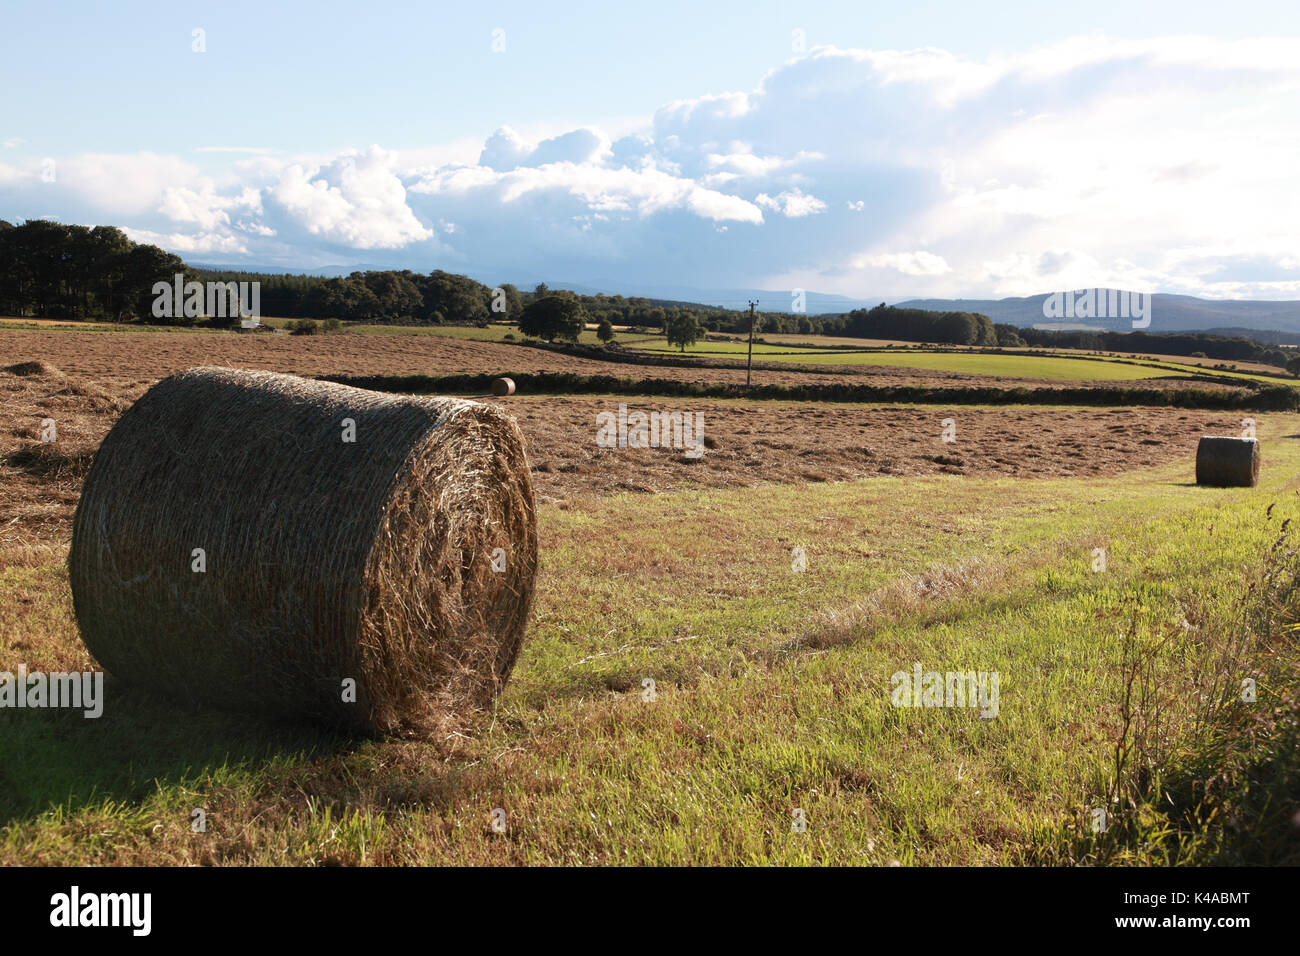 A bale of hay in the fertile agricultural land of Aberdeenshire with cut grass still lying on the field Stock Photo